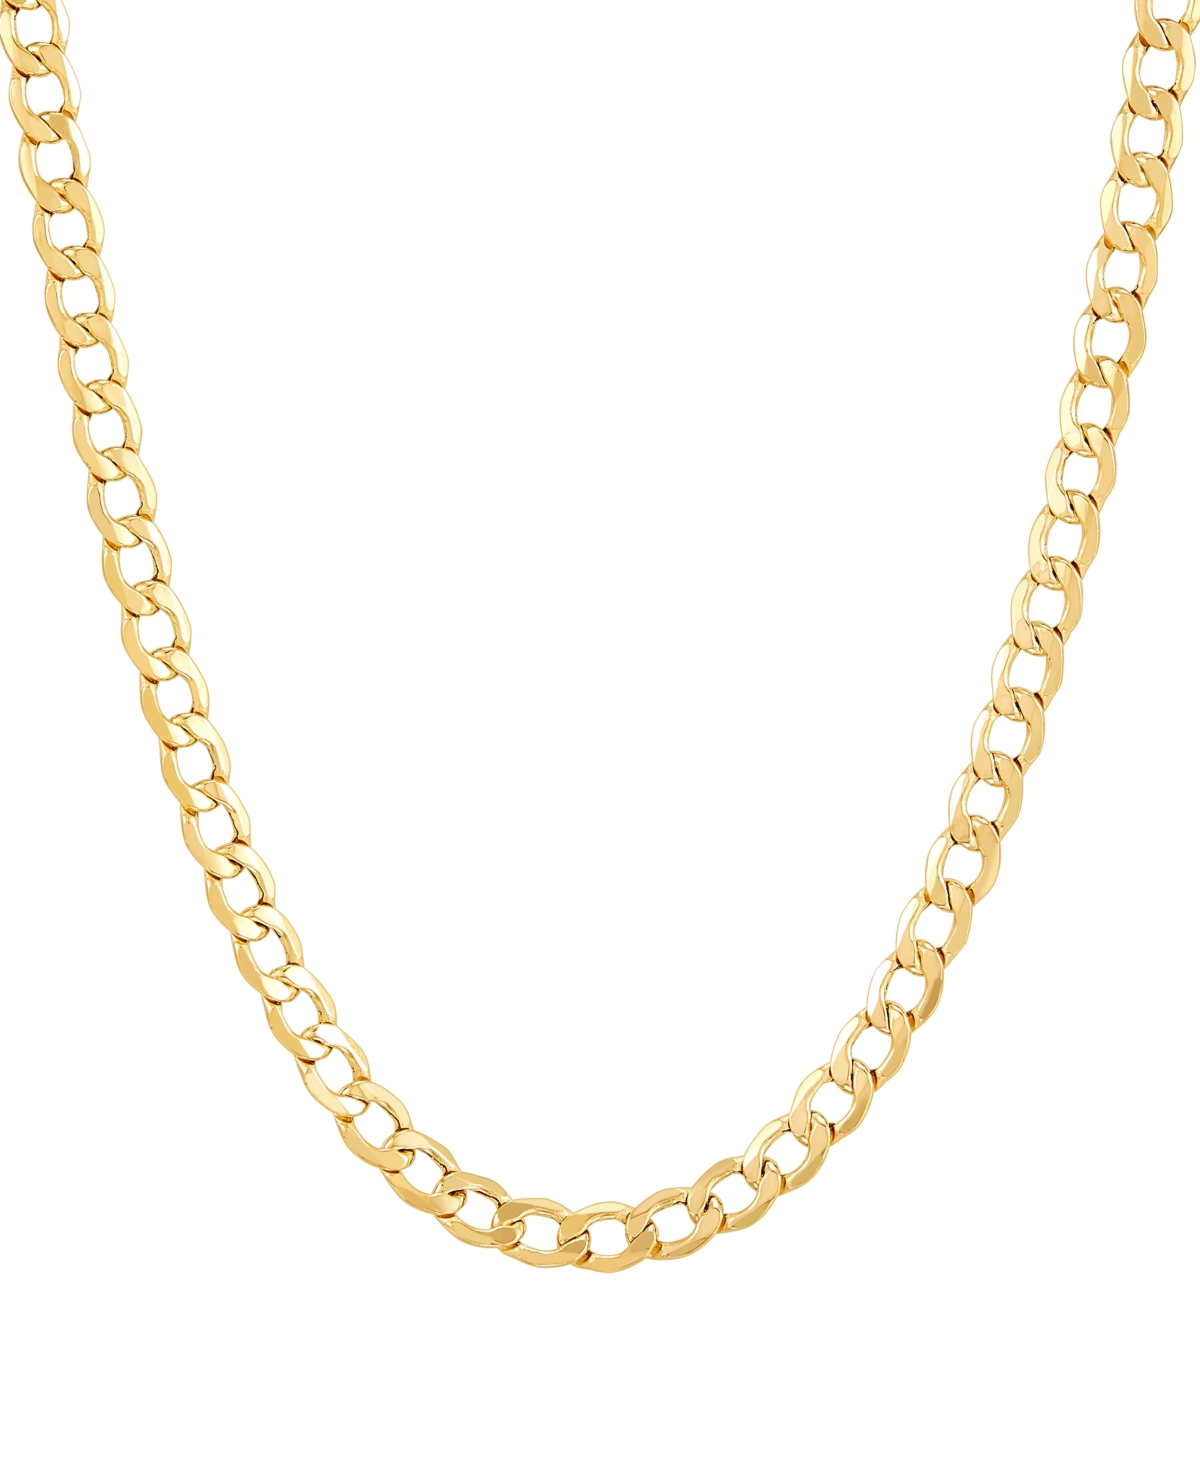 20" Curb Link Chain Necklace (5mm) in 14k Gold - Yellow Gold